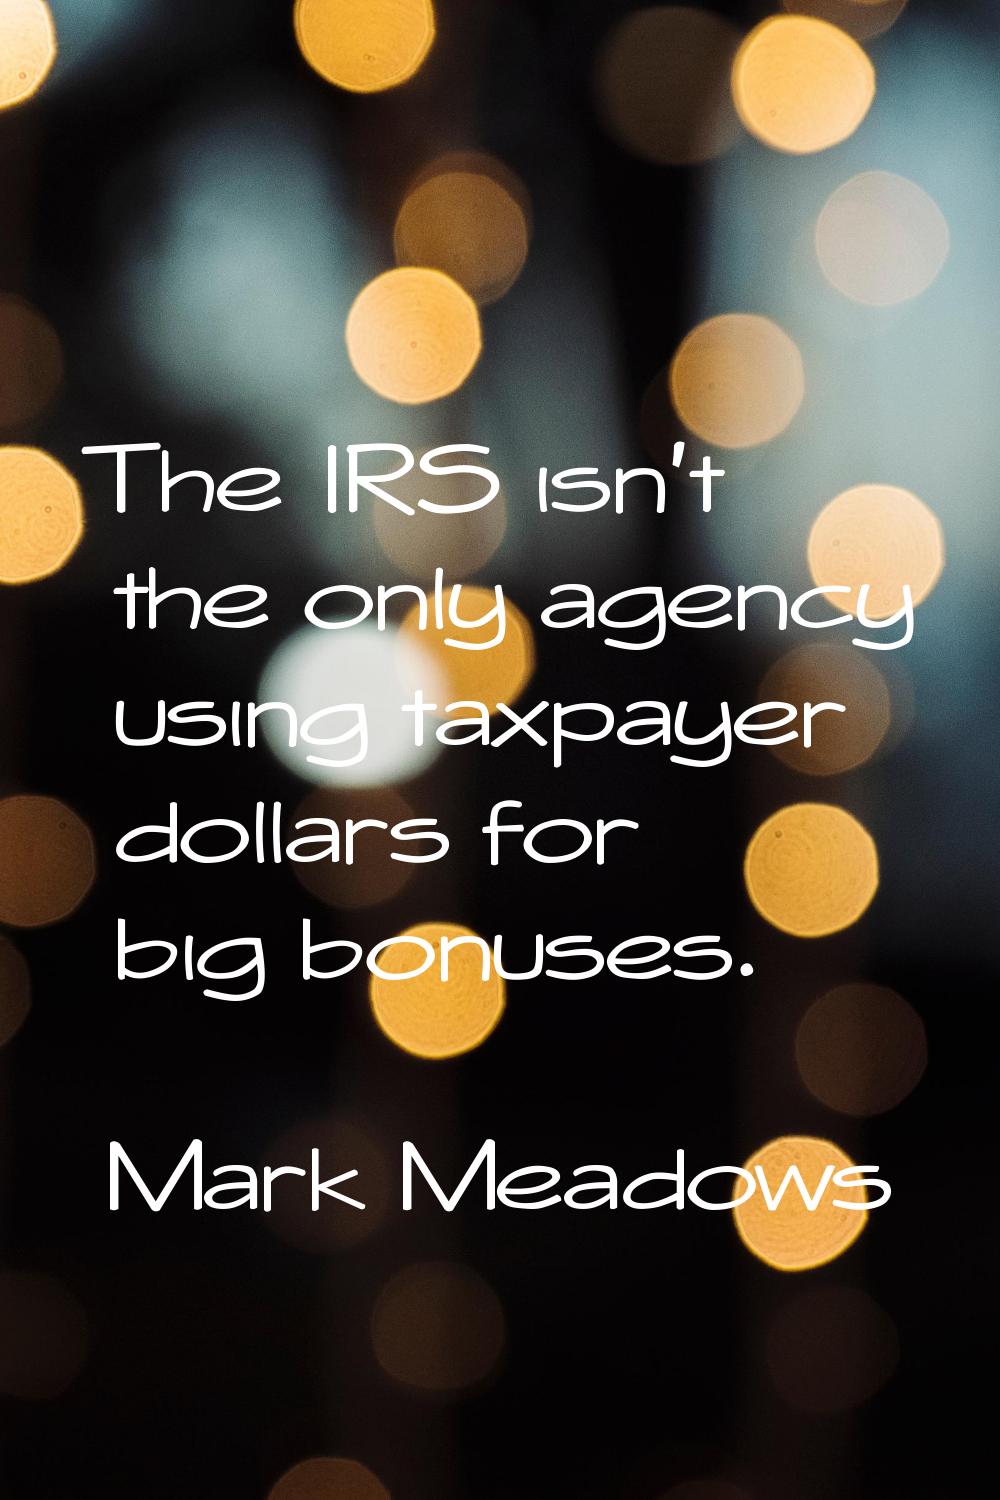 The IRS isn't the only agency using taxpayer dollars for big bonuses.